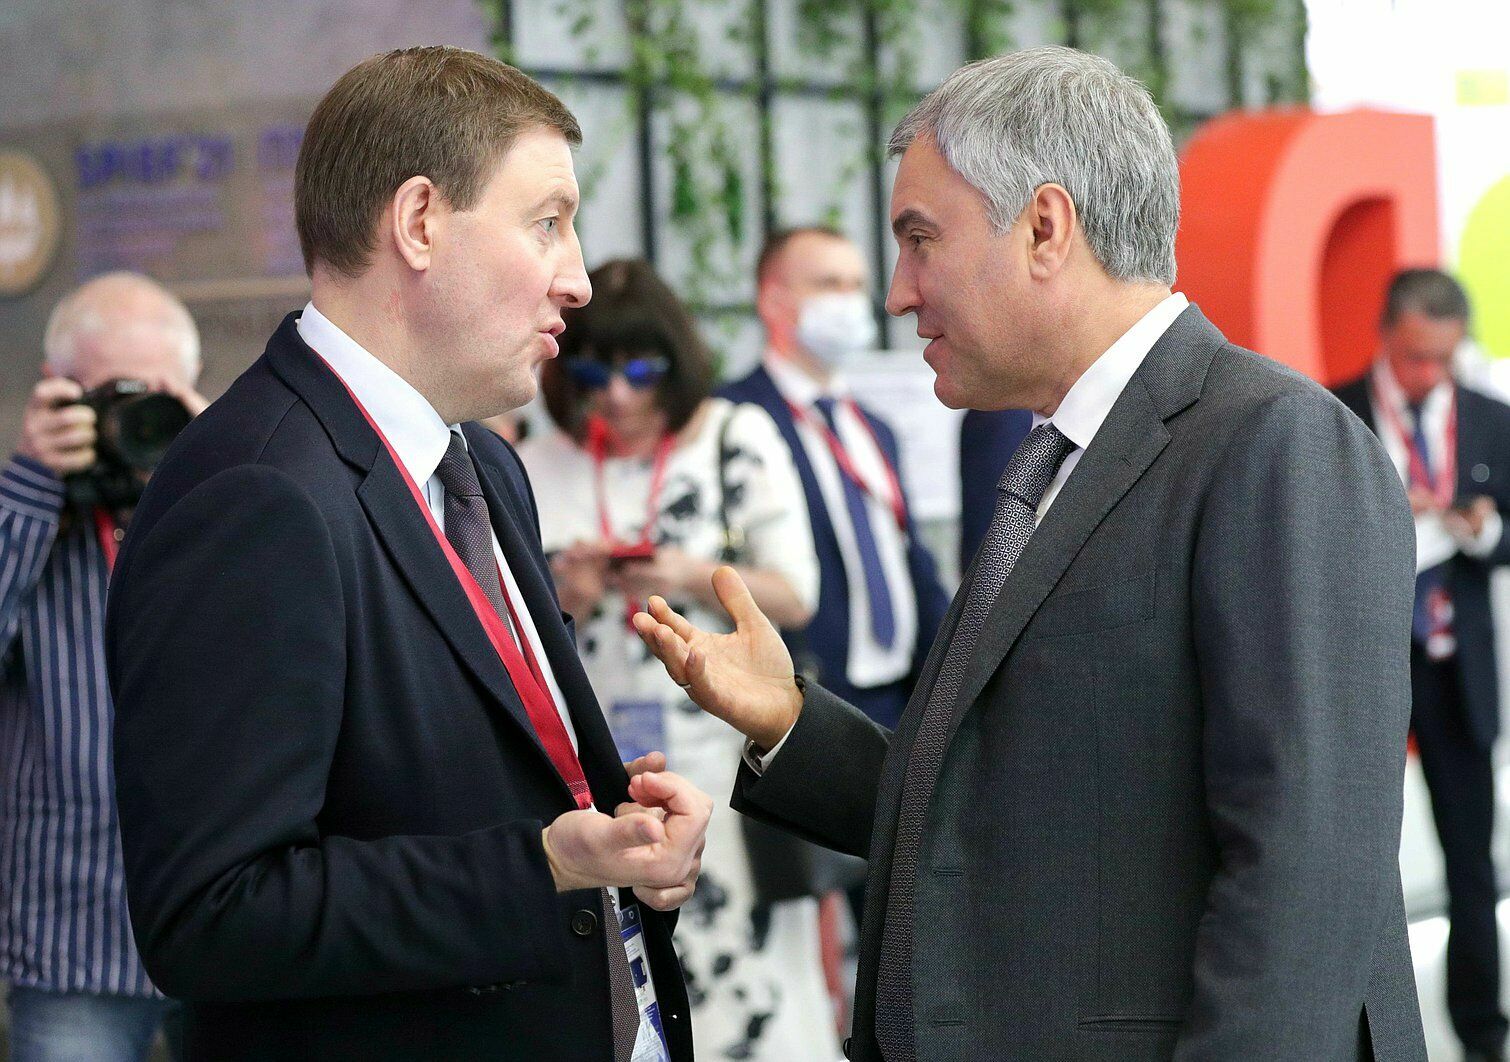 Party Faction vs Faction Party. Why are United Russia leaders quarreling?